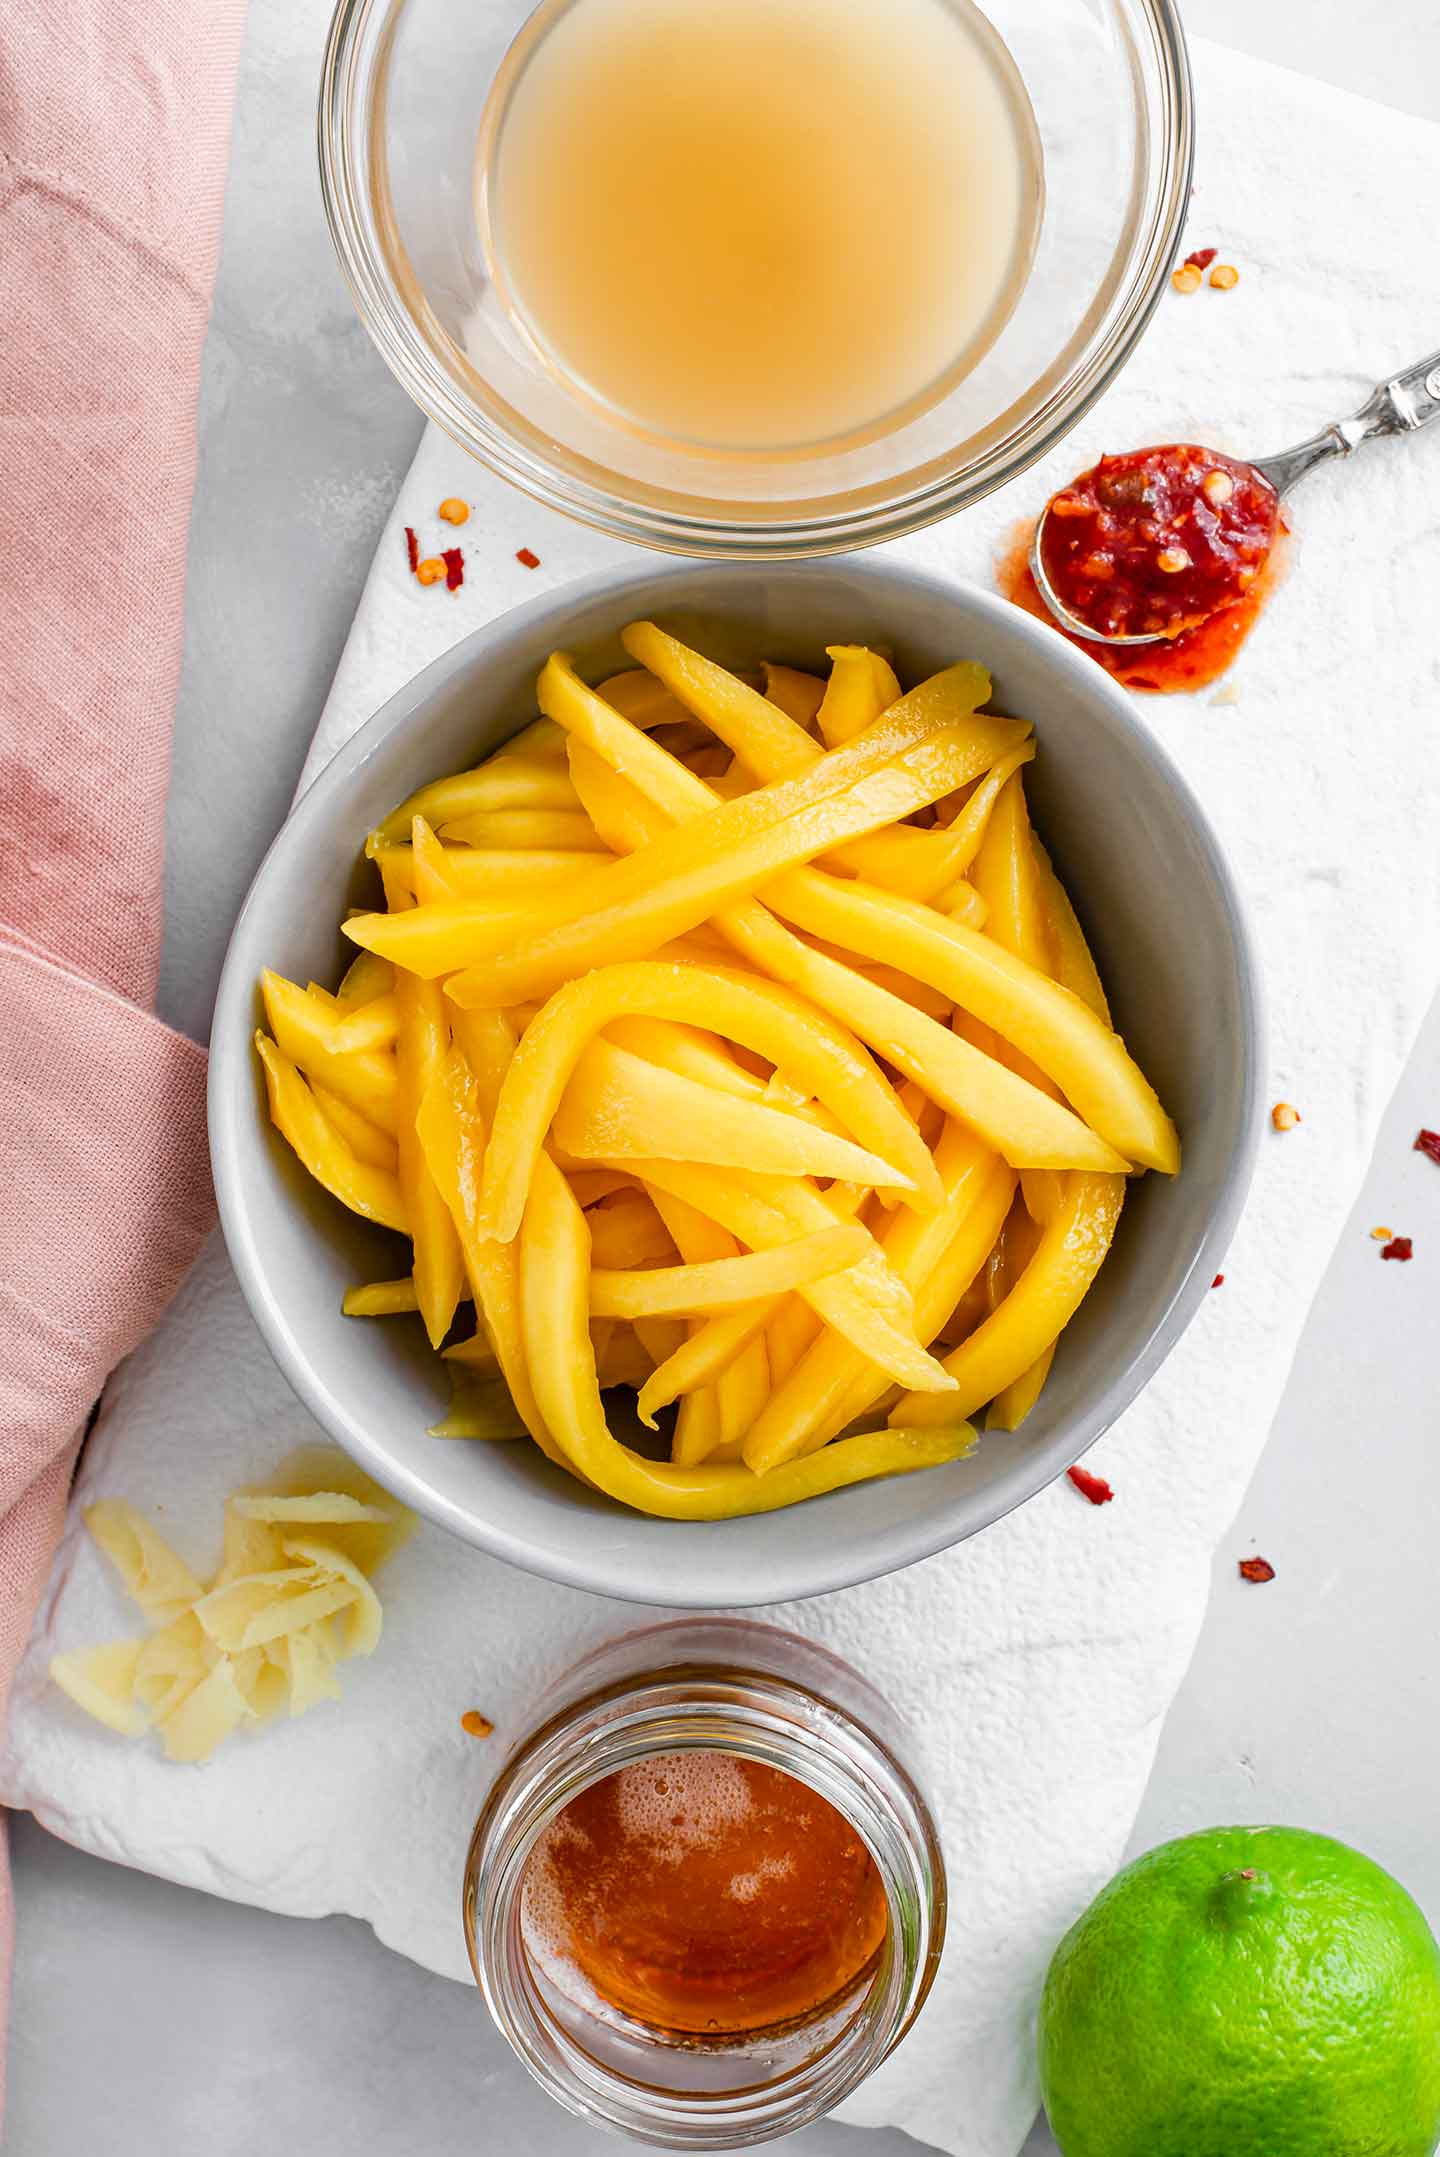 Top down view of sliced mango in a small dish surrounded by apple cider vinegar, chilli garlic sauce, fresh ginger, maple syrup, and a lime.